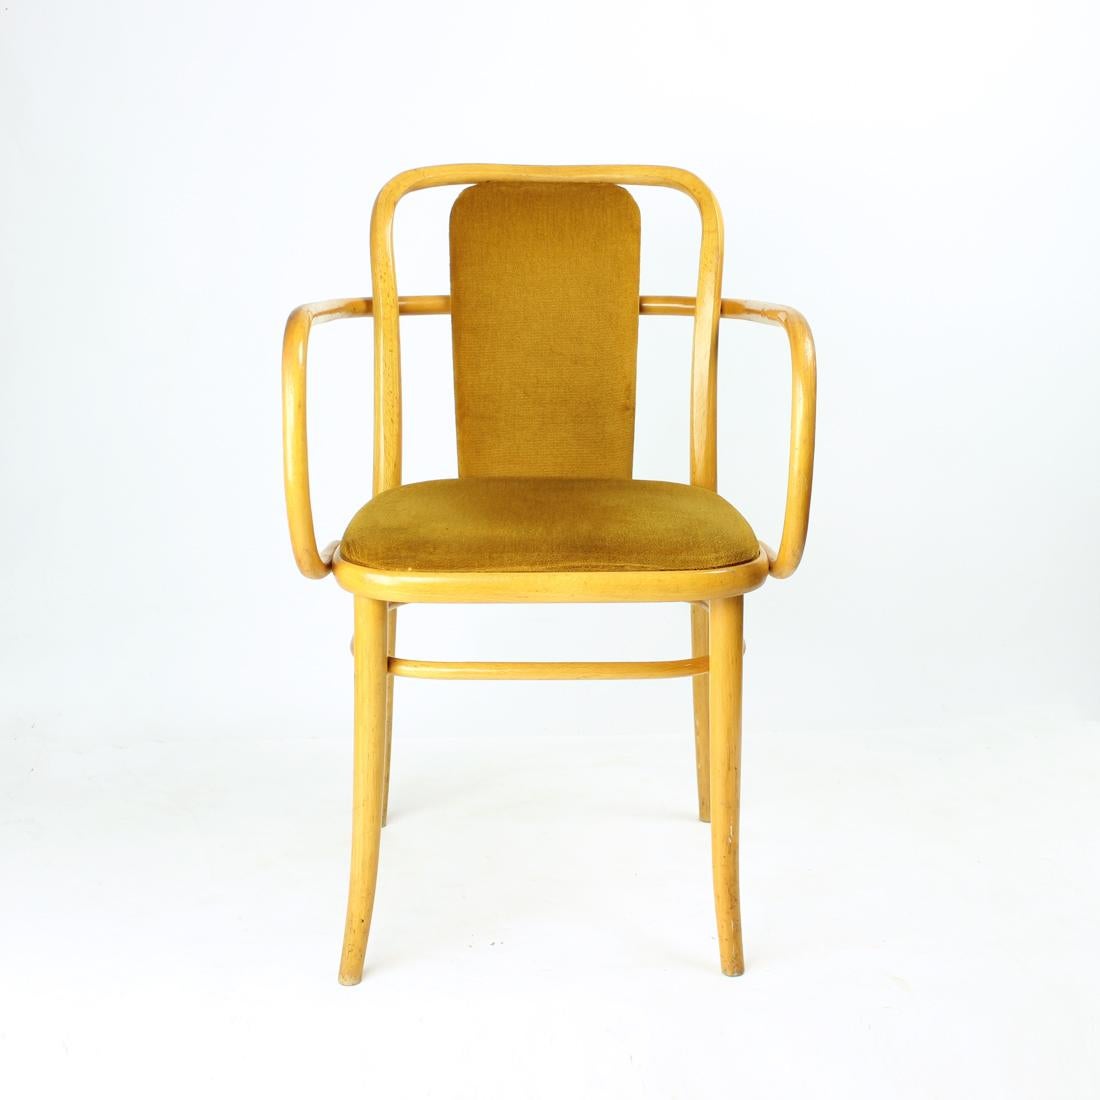 Iconic and elegant armchair produced by TON in Czech republic in 1930s. This particular chair is a variation on the classic model '811' Thonet Hoffman chair. Produced in blond wood oak bentwood. Original gold velvet fabric on the seat and backrest. 